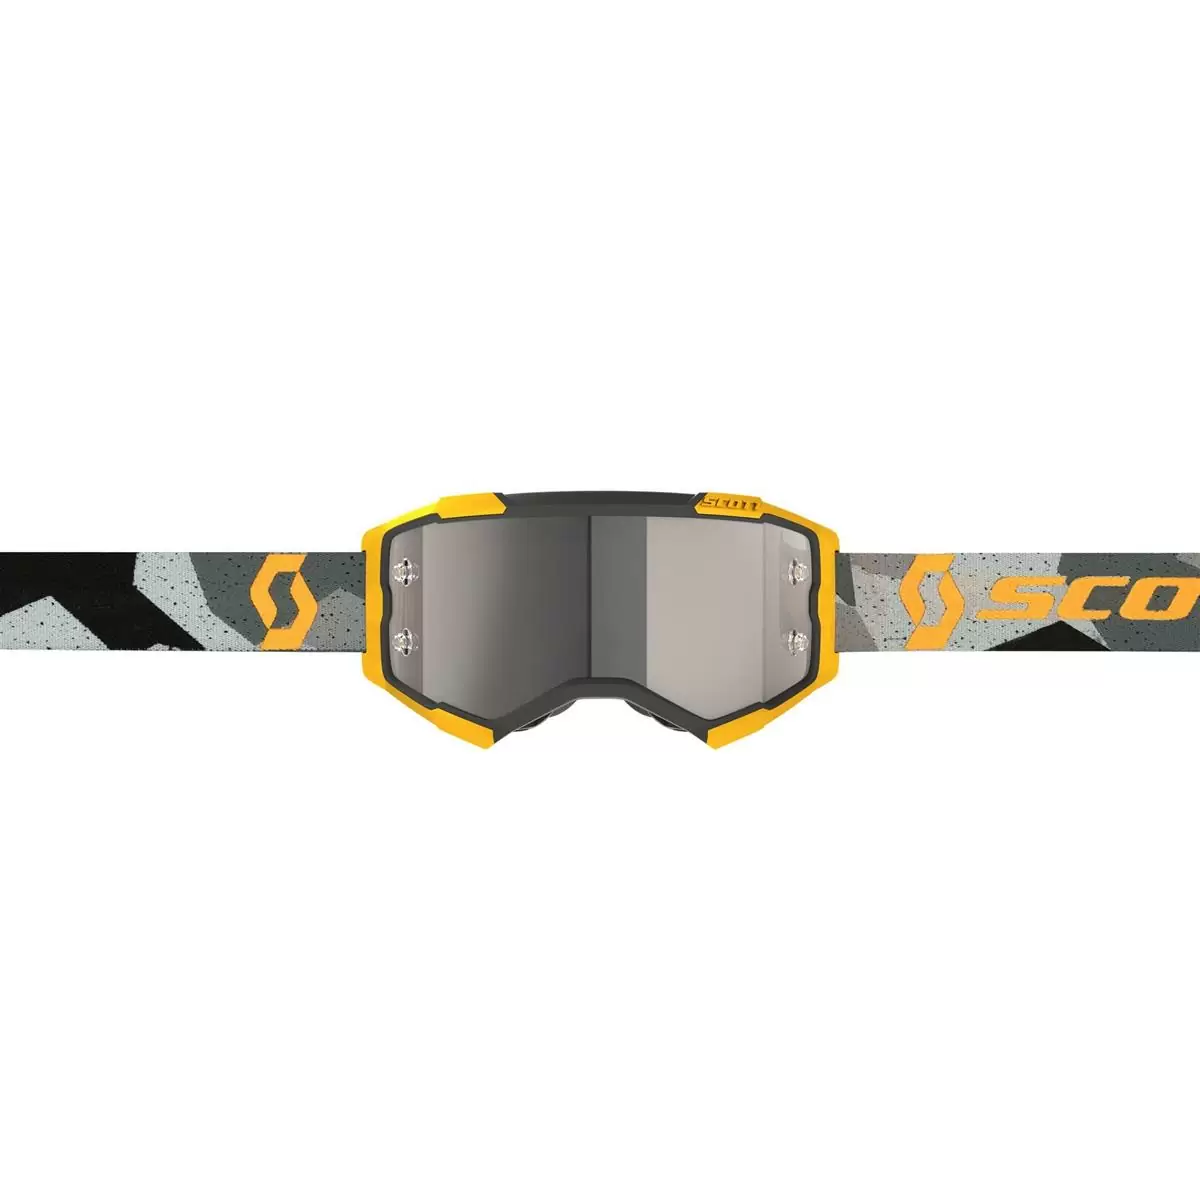 Fury Goggle Yellow/Grey Silver Chrome Works Linse #1